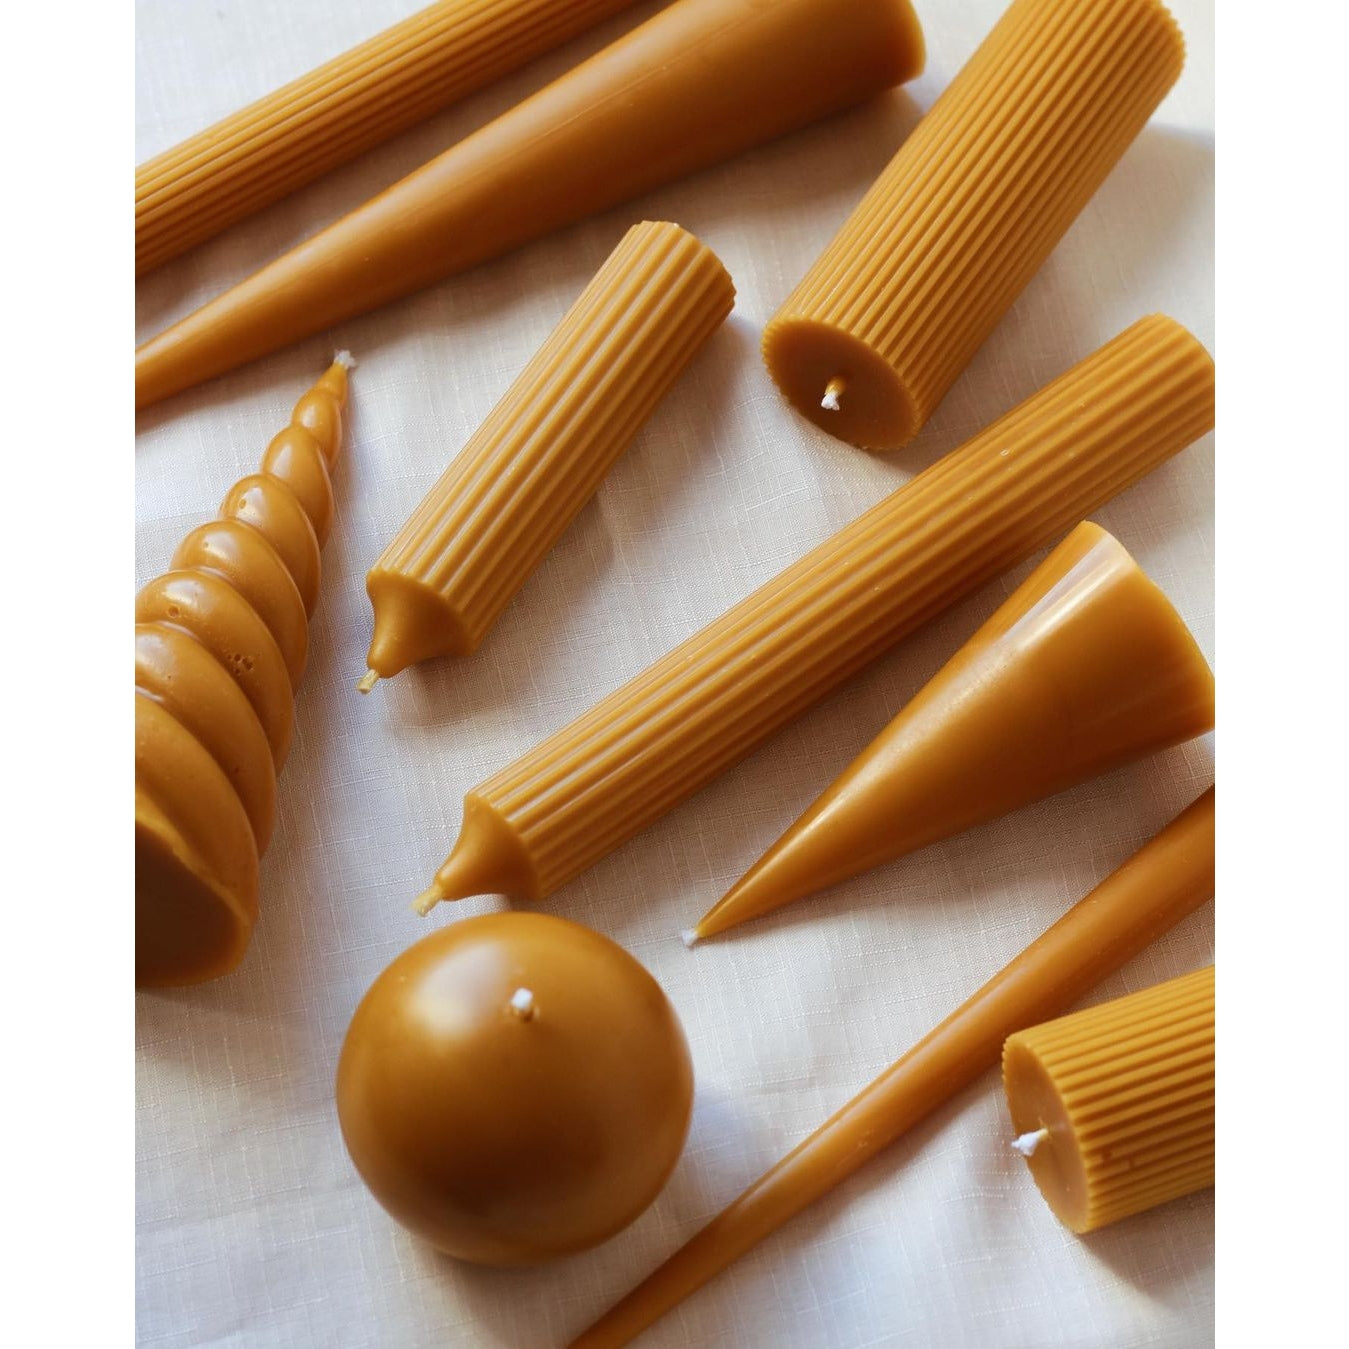 Basic Ones - Organic Beeswax Candles